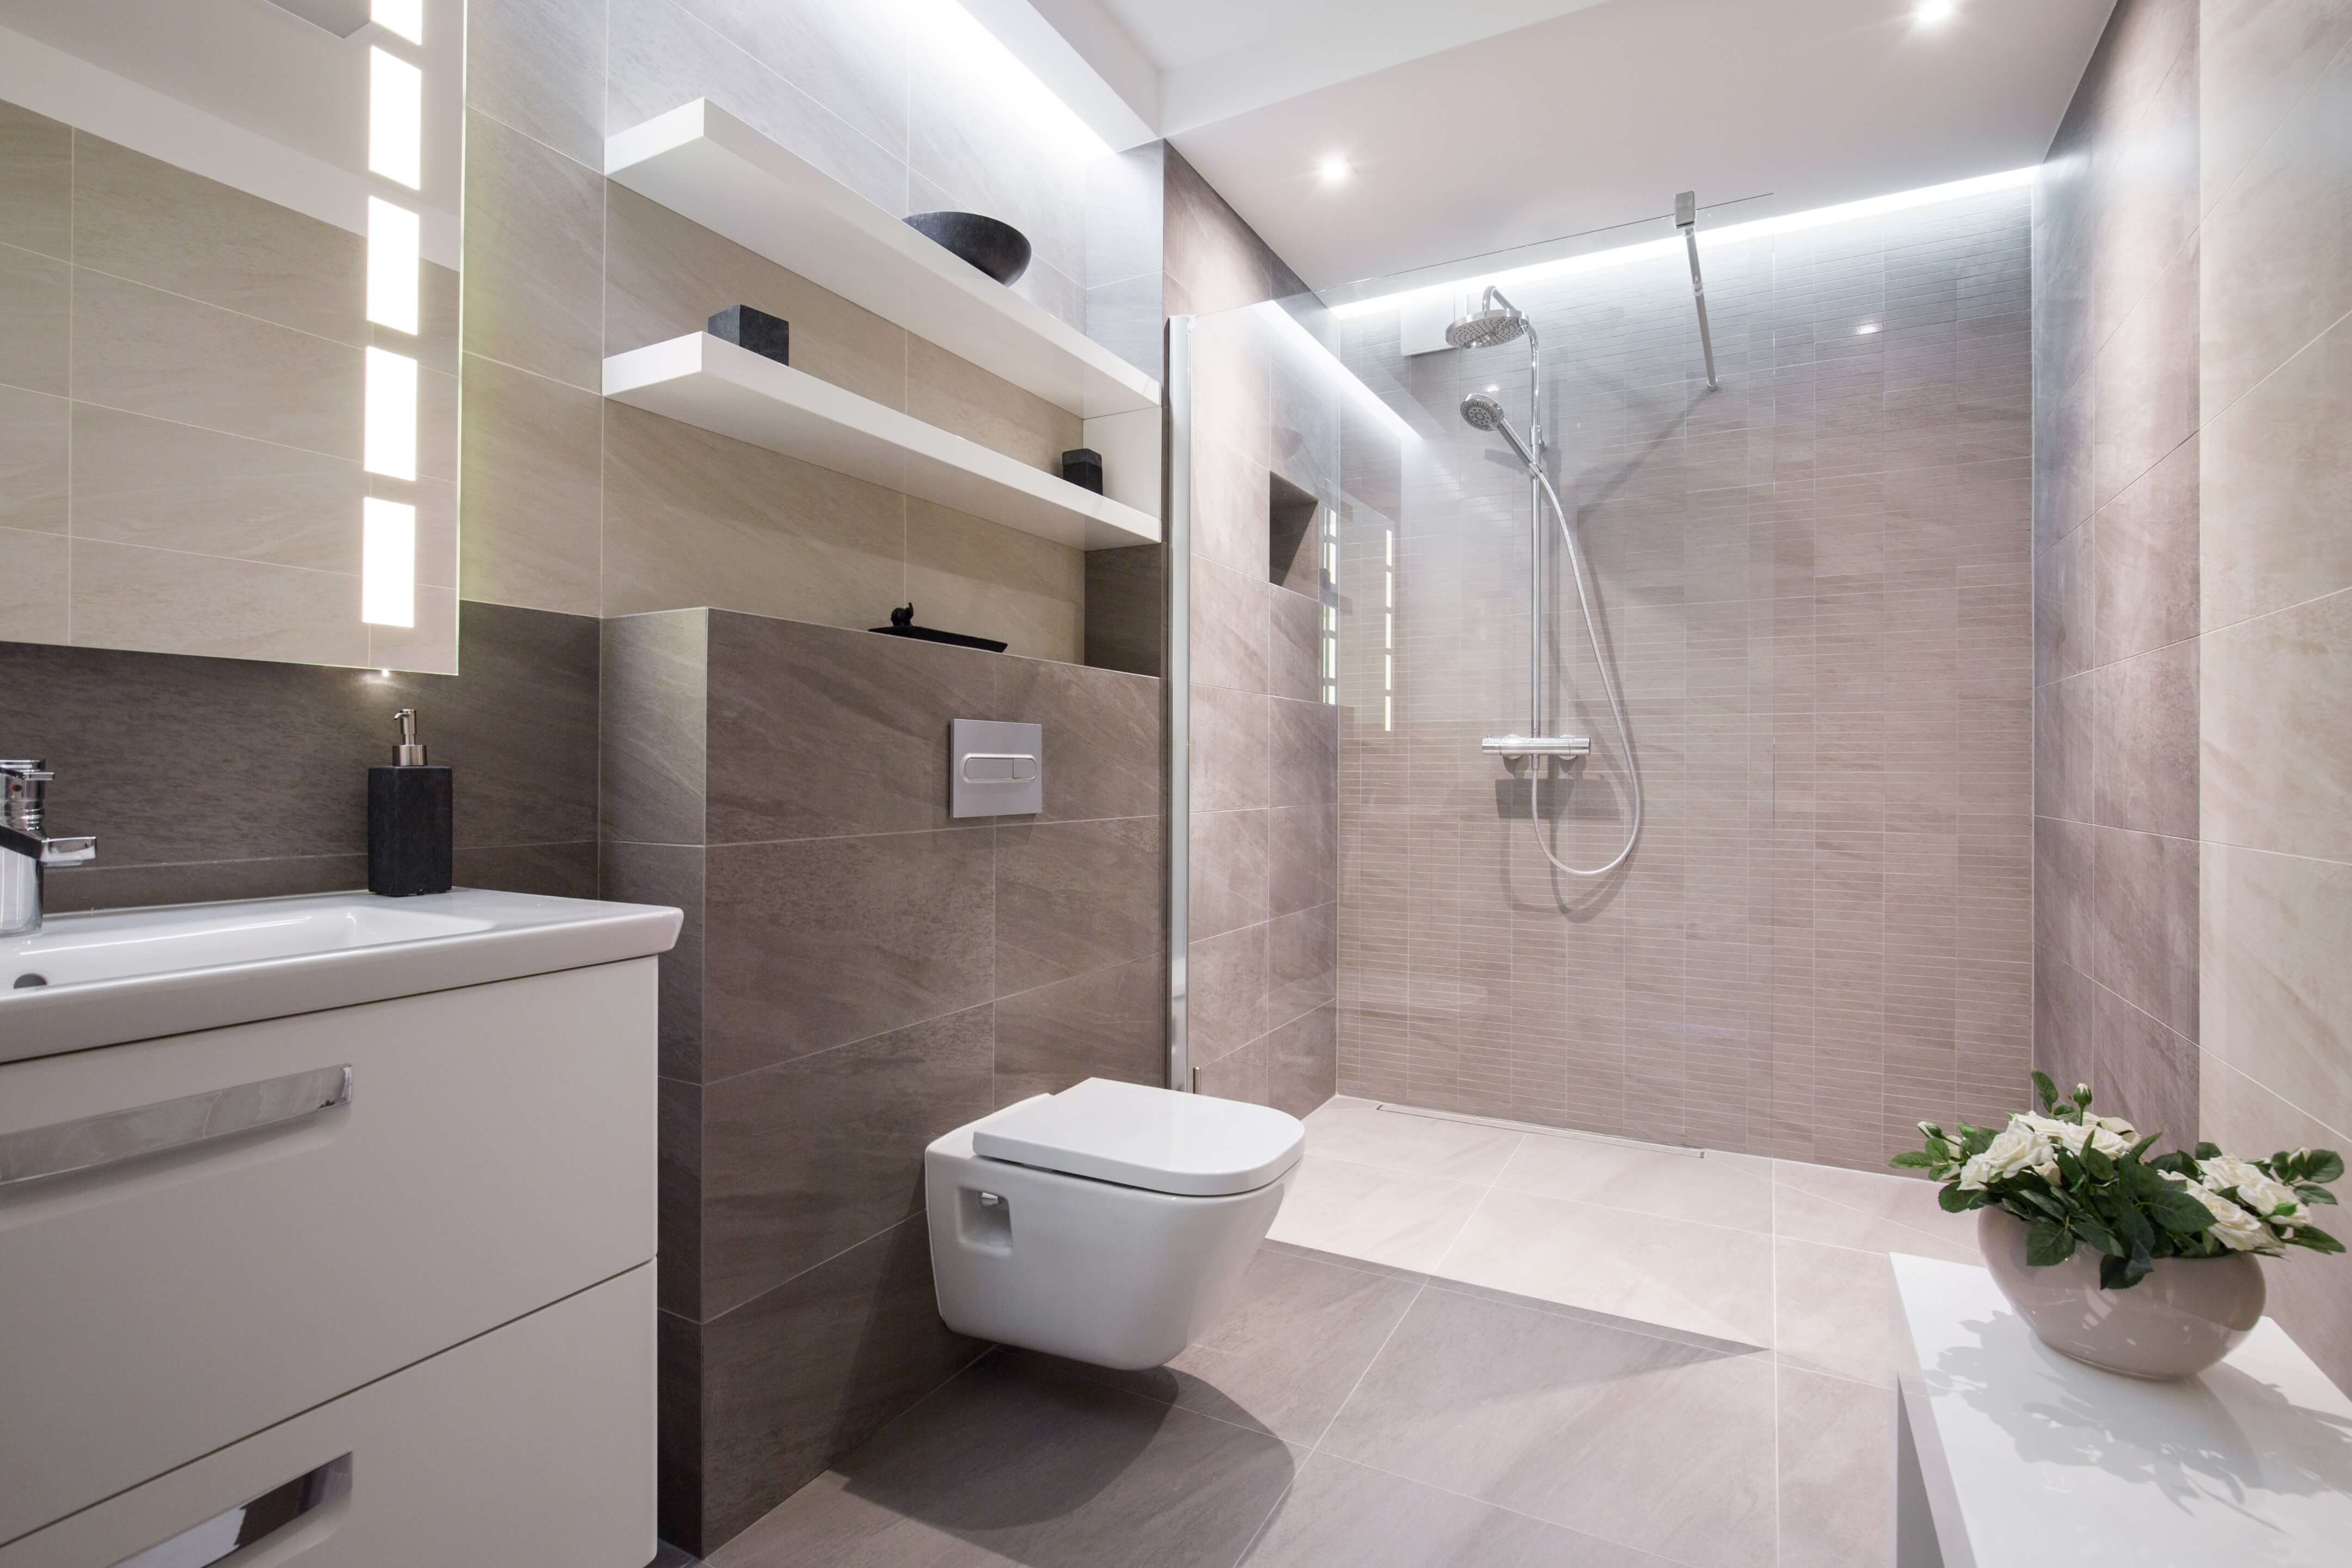 local bathroom fitters south london